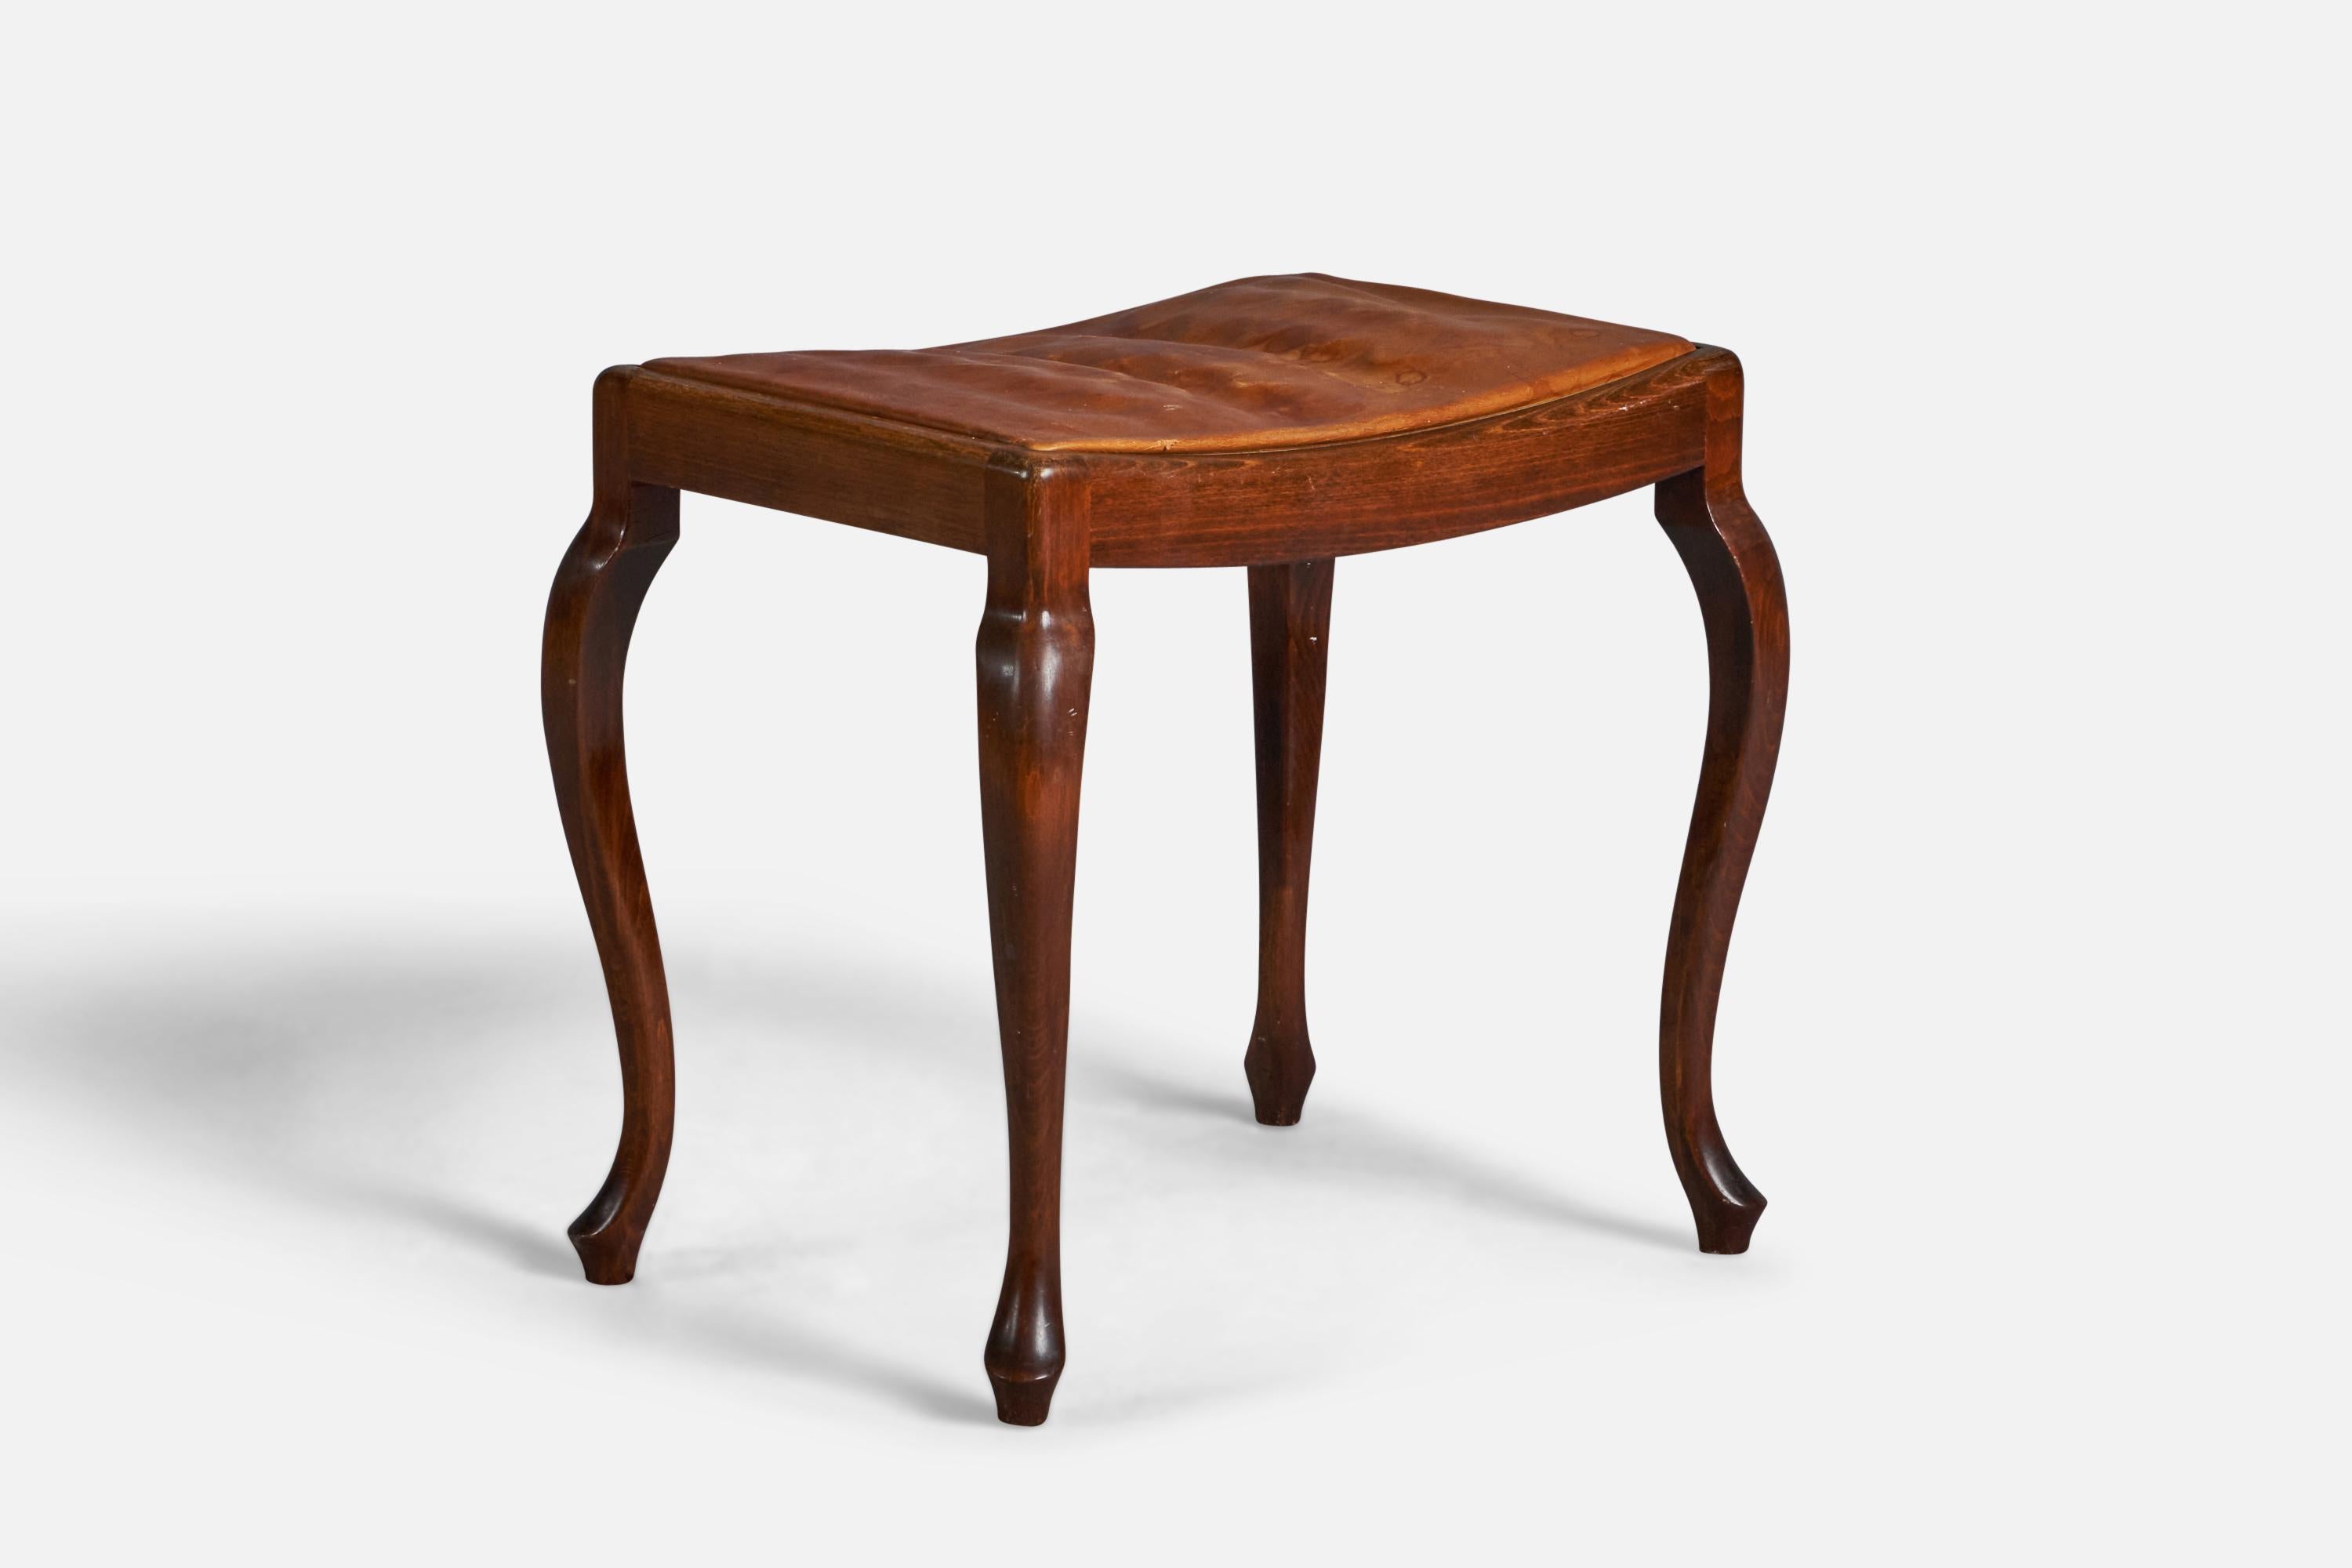 A solid mahogany and natural brown leather stool, designed and produced in Denmark, 1940s.